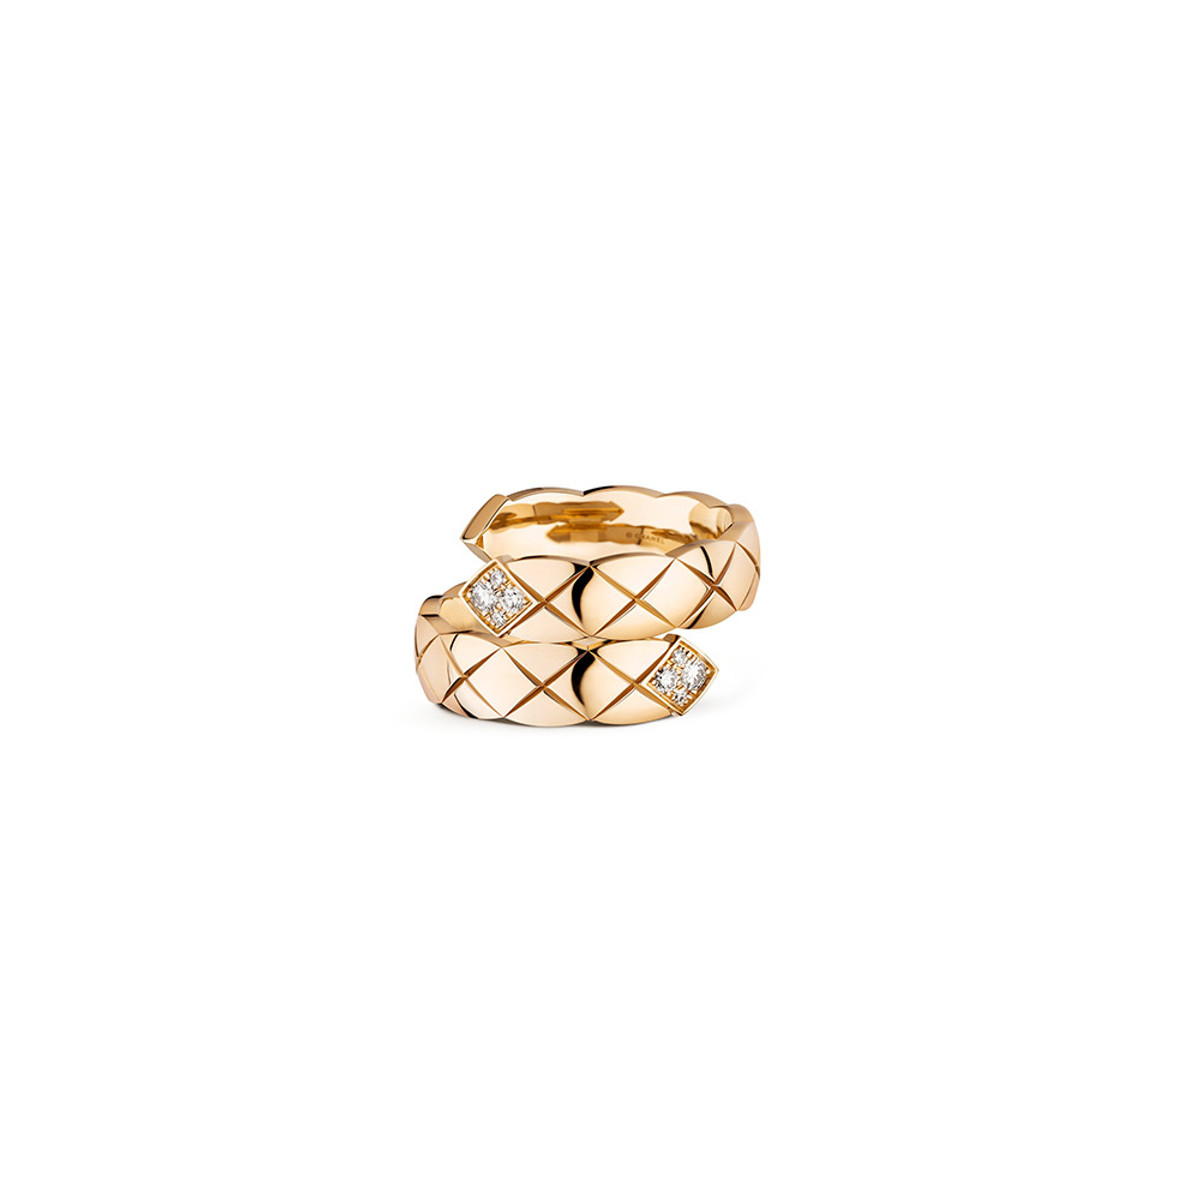 CHANEL COCO CRUSH TOI ET MOI RING-29544 Product Image